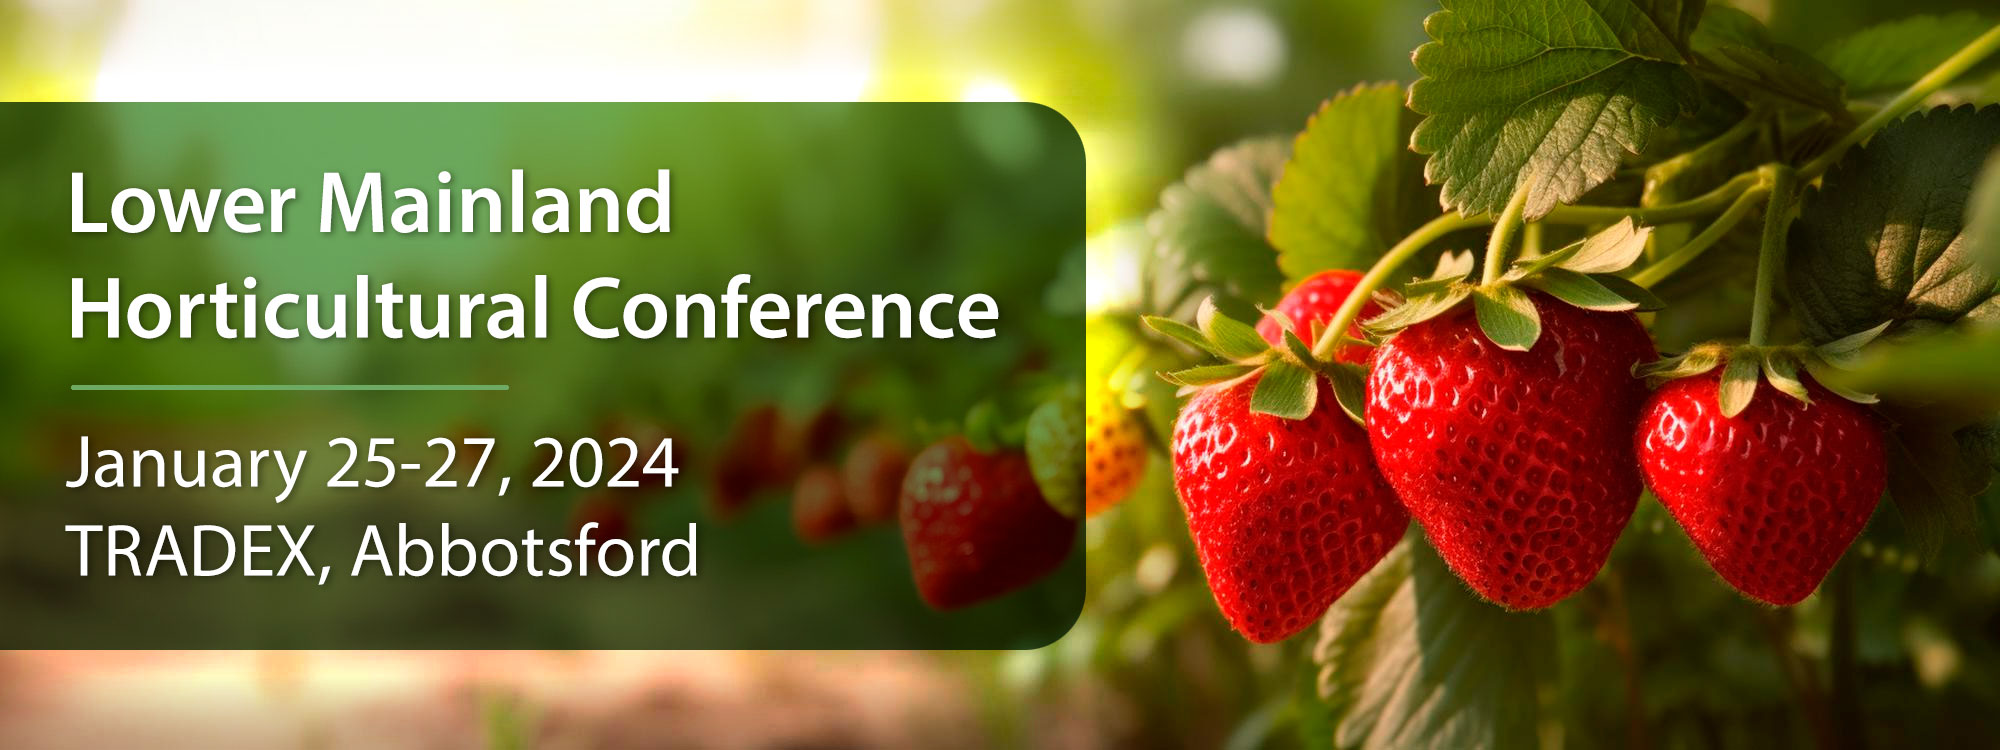 The Lower Mainland Horticultural Conference,